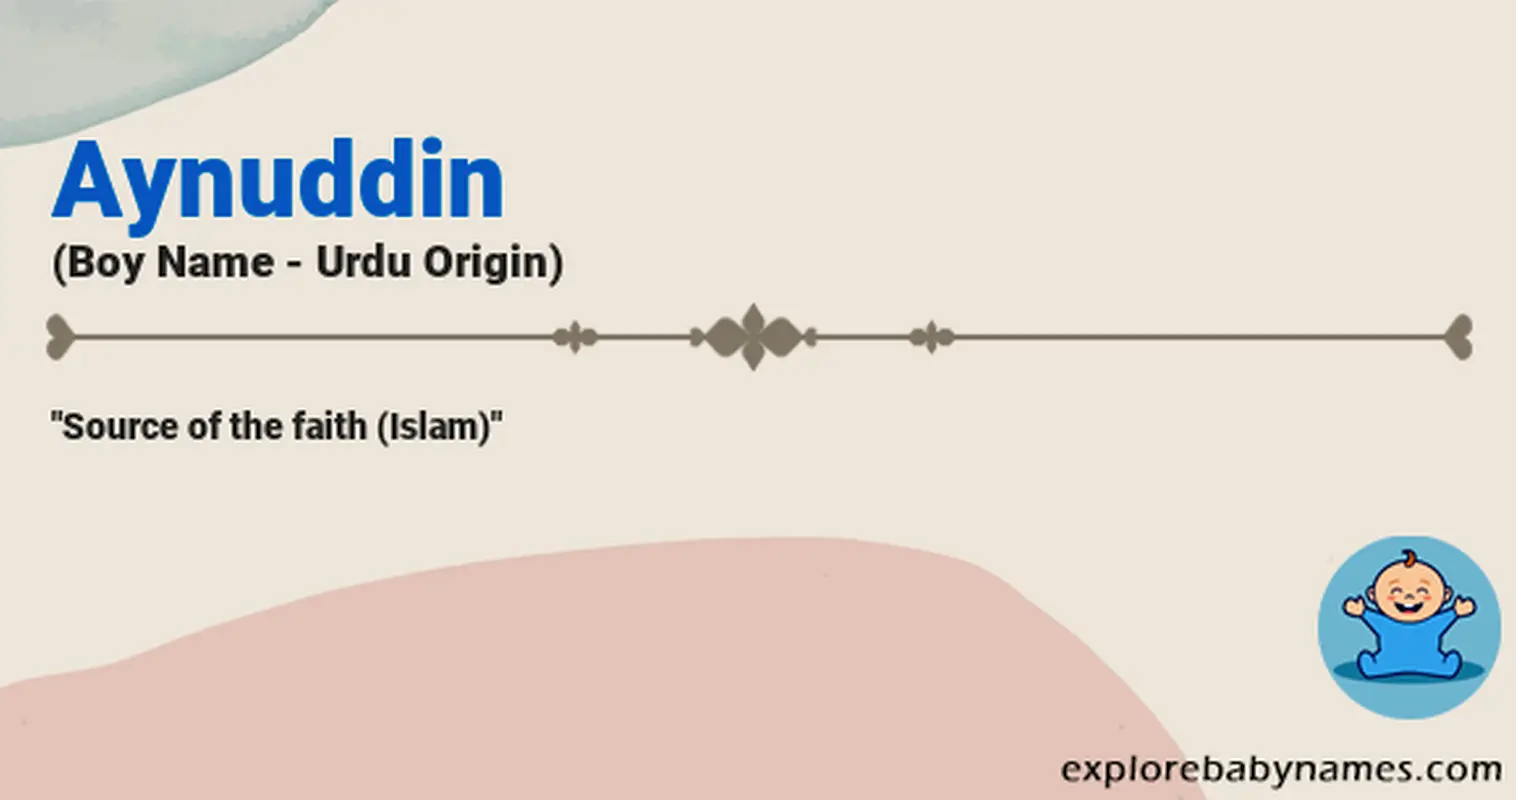 Meaning of Aynuddin